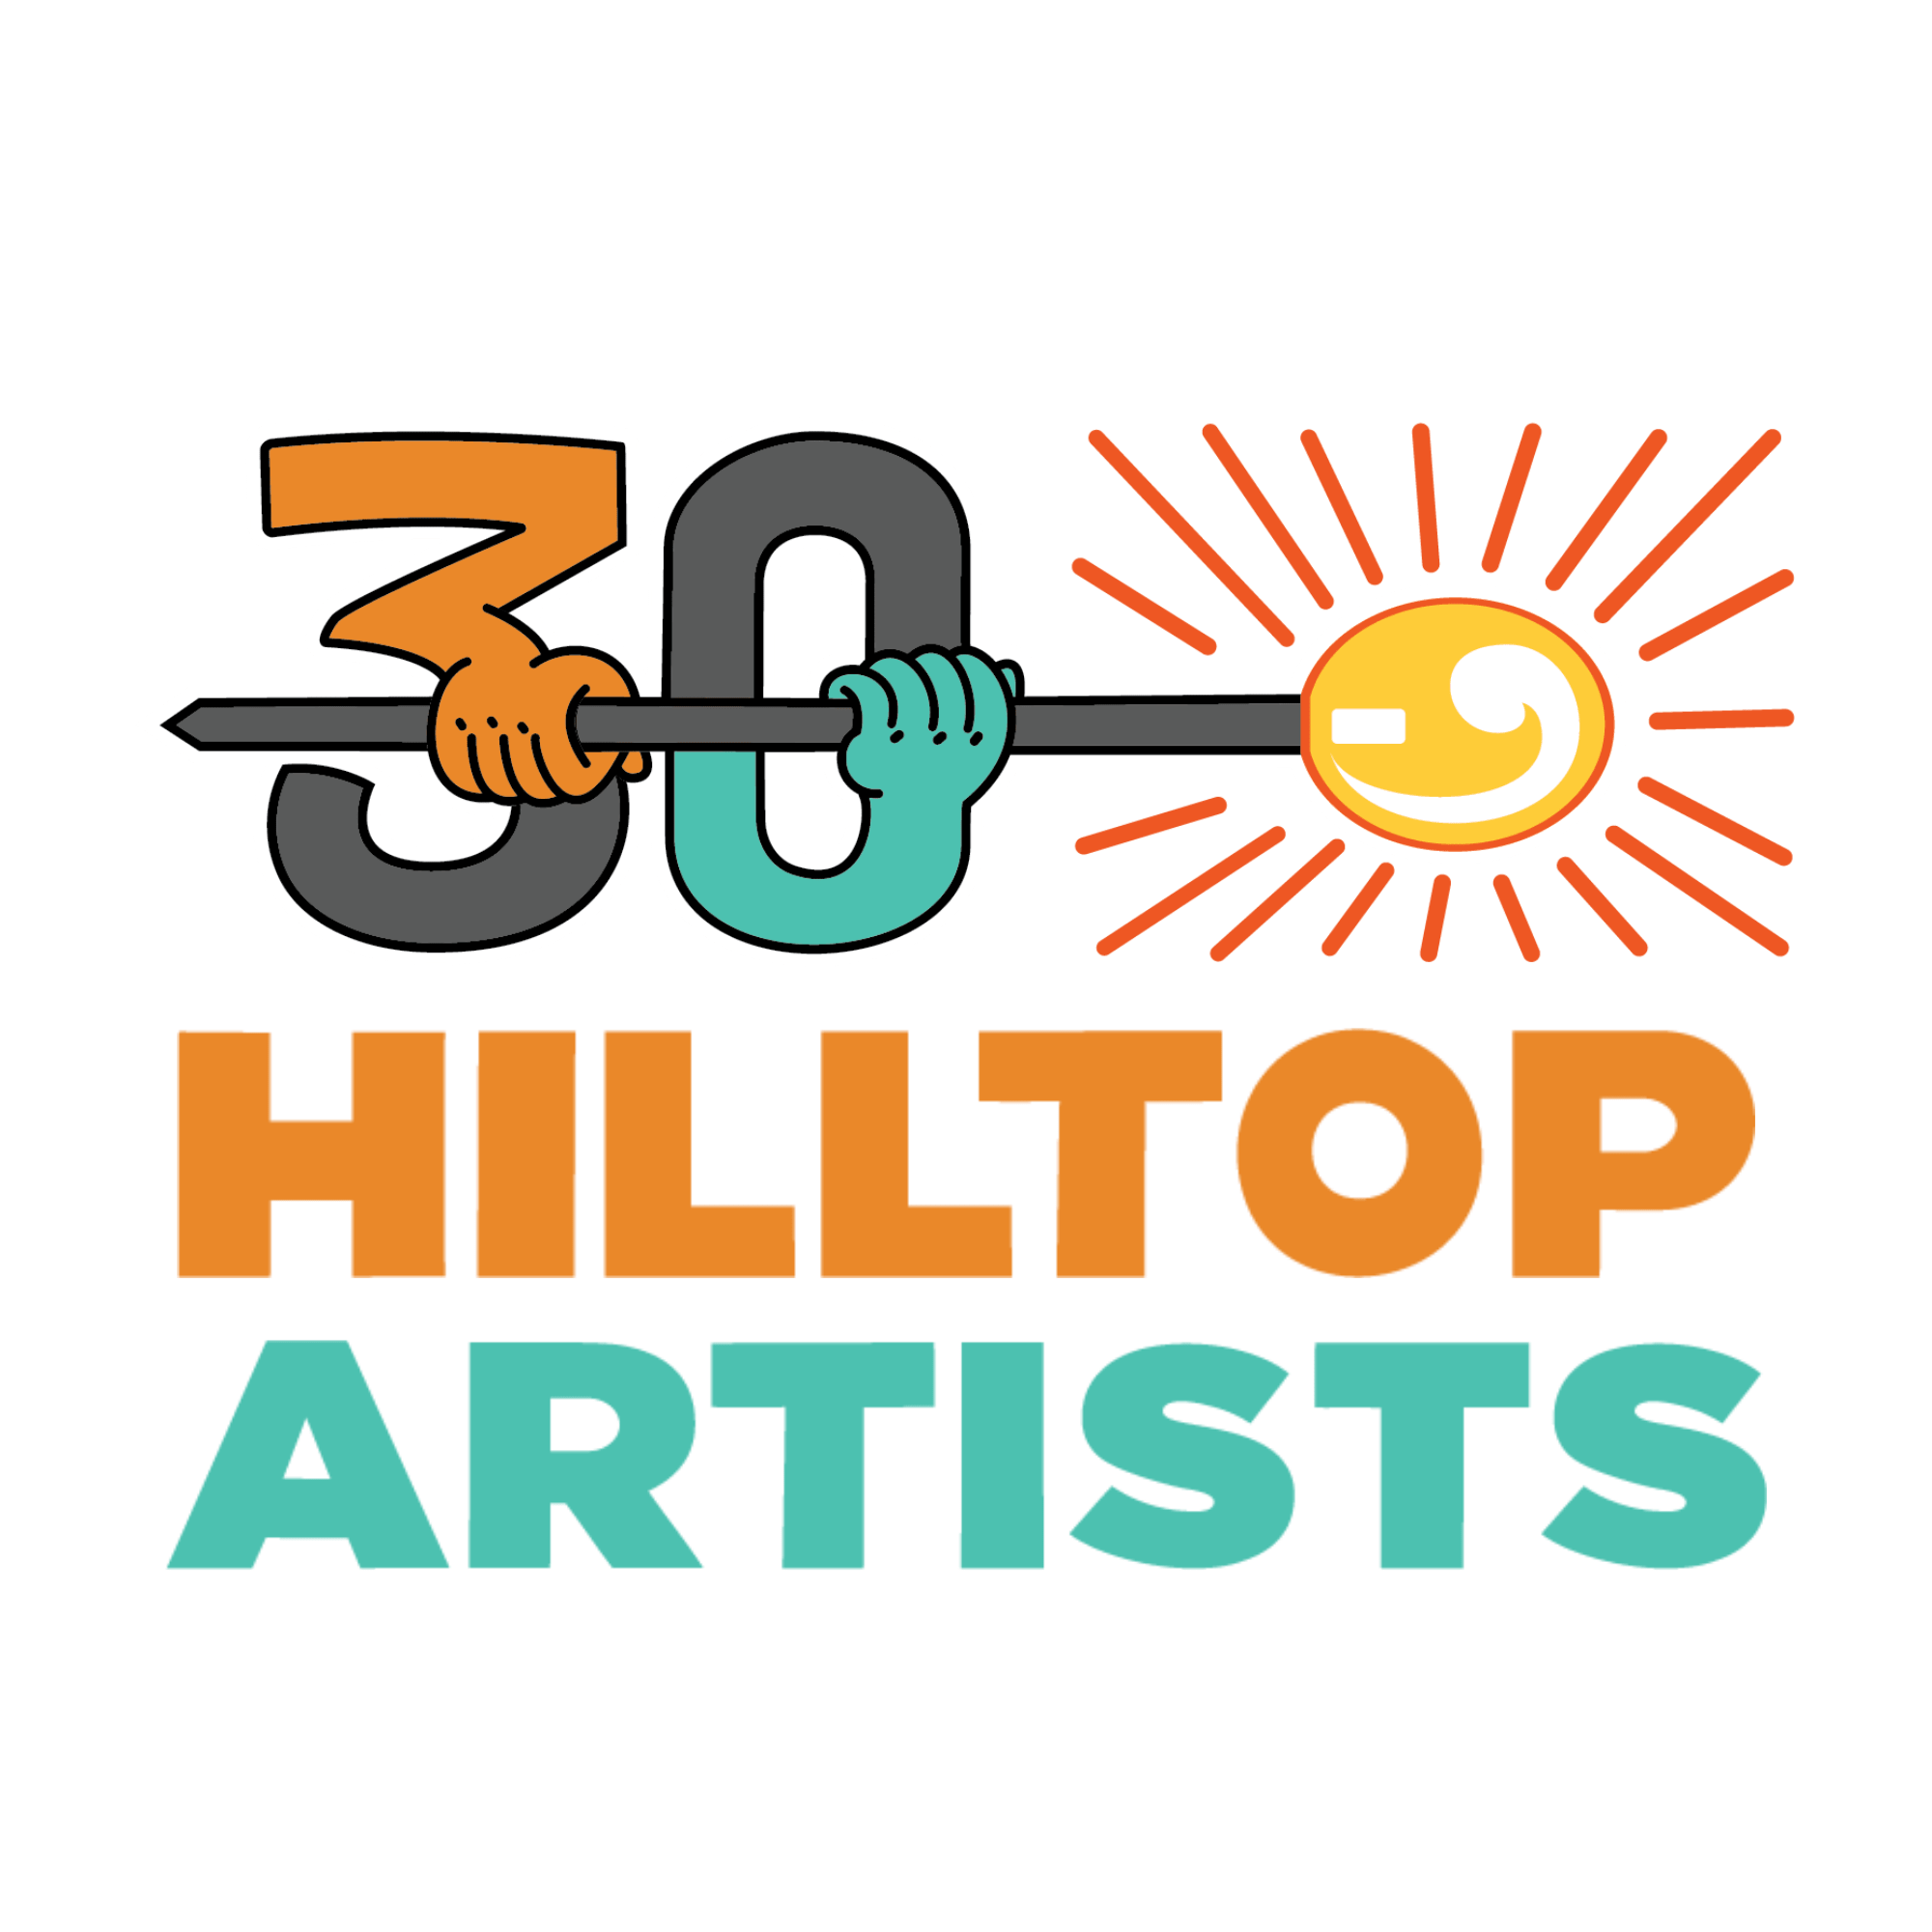 Hilltop Artists Celebrates 30 Years Of Connecting Youth To Better Futures Through The Power Of Glass Art